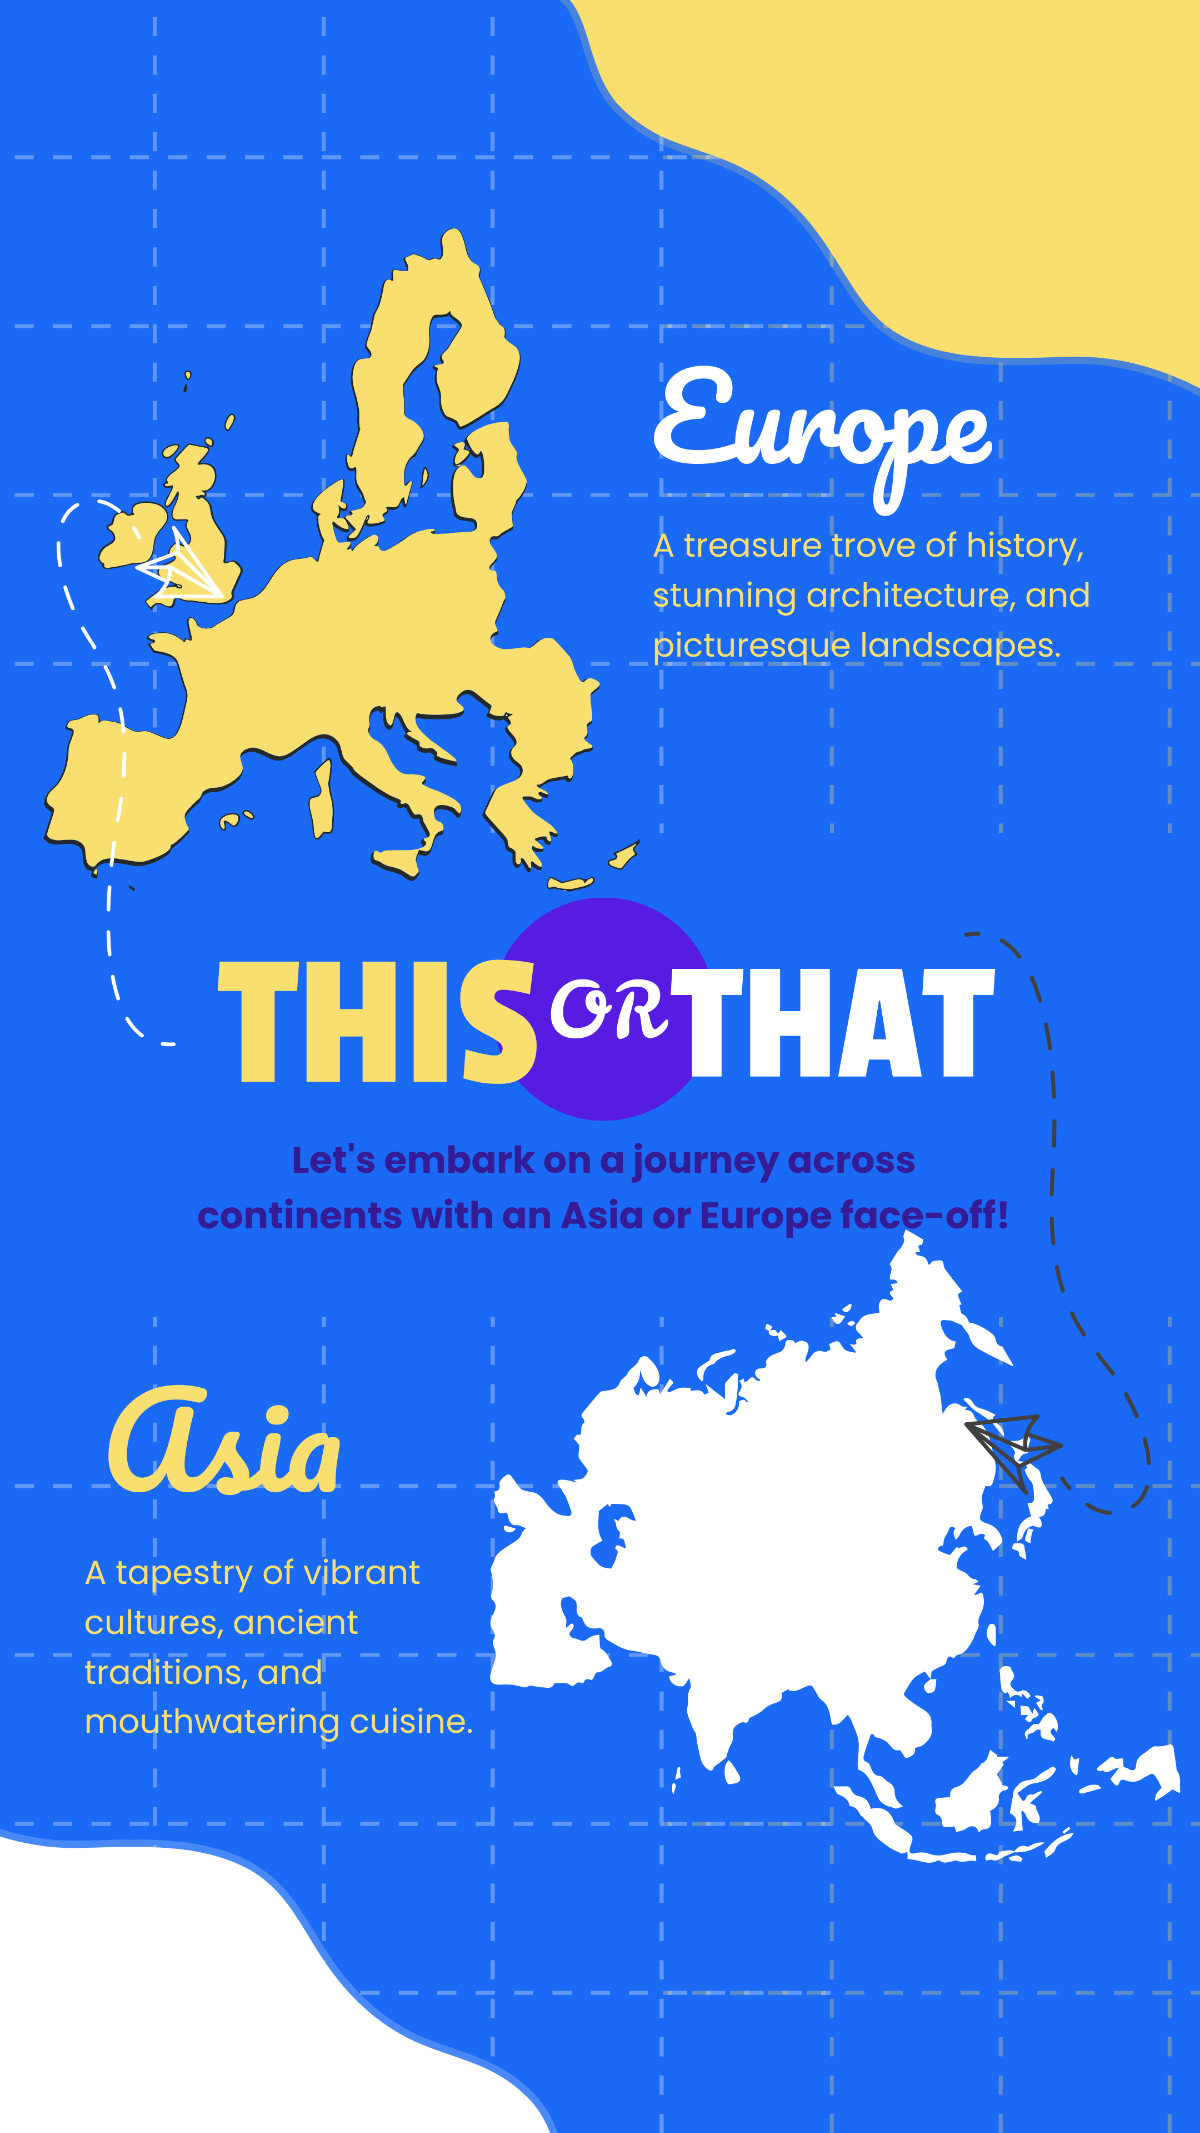 Asia or Europe This or That Story